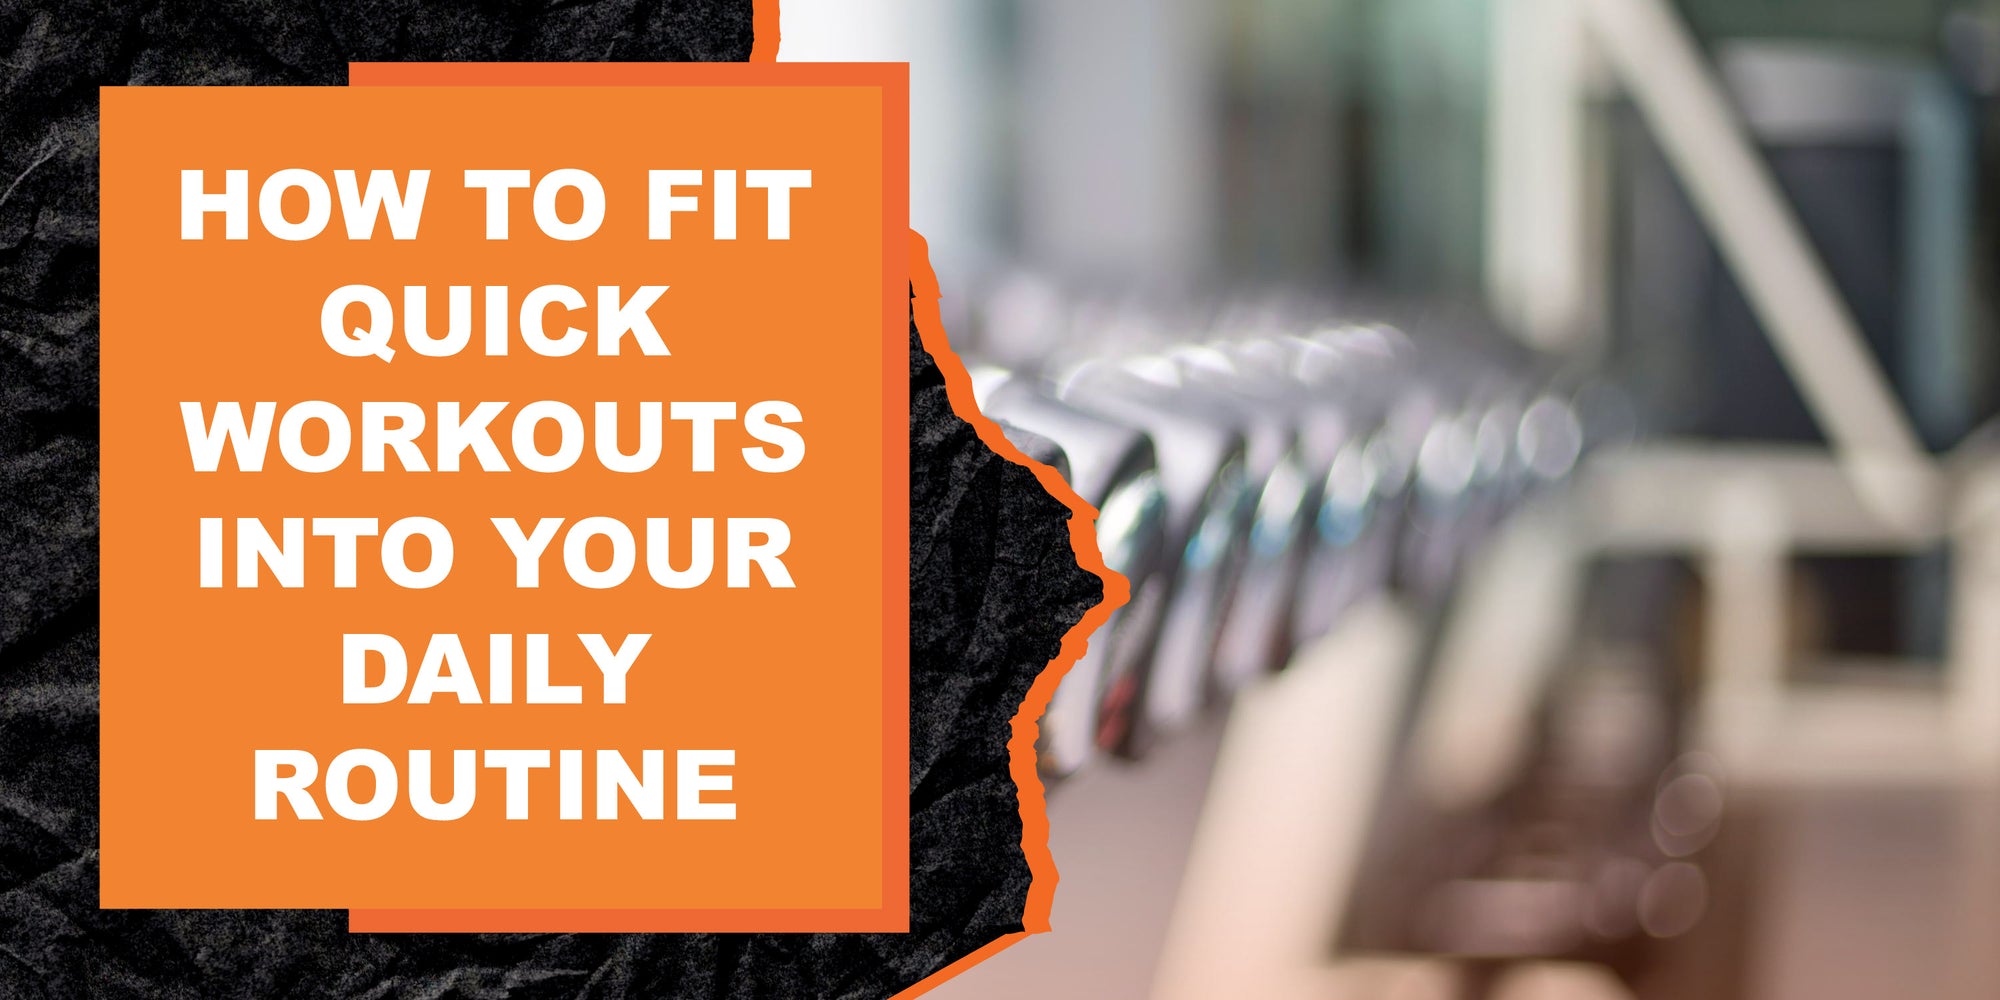 How to Fit Quick Workouts Into Your Daily Routine